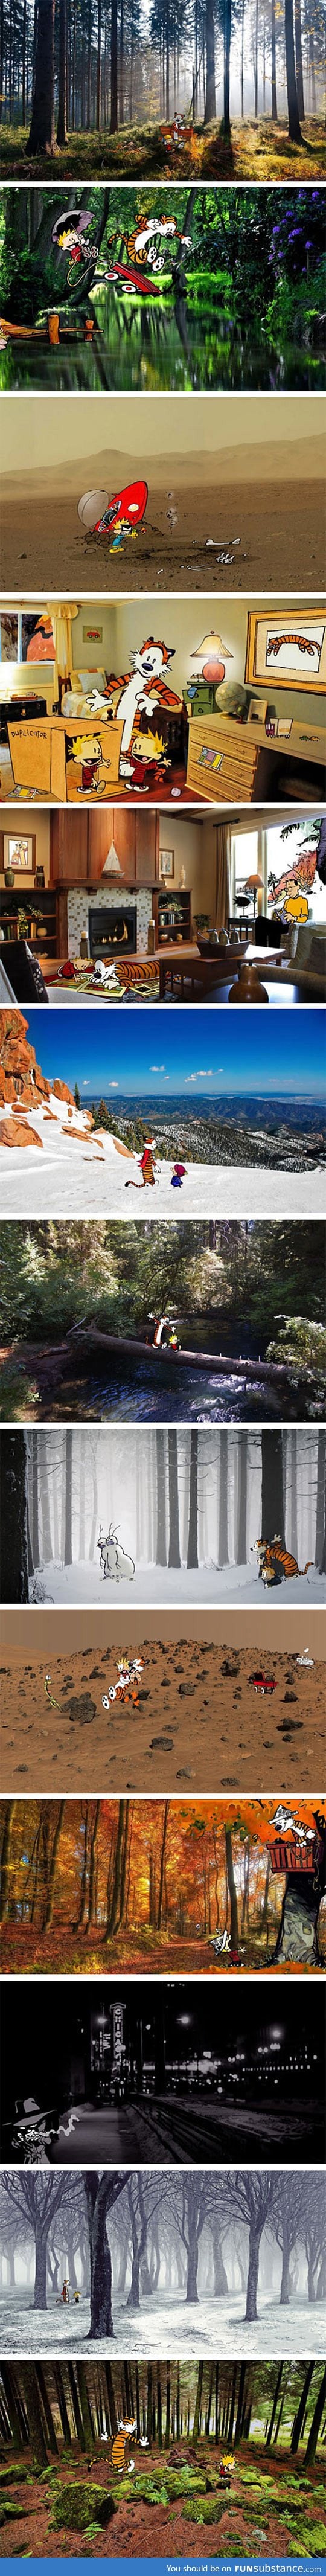 Calvin and Hobbes in real locations